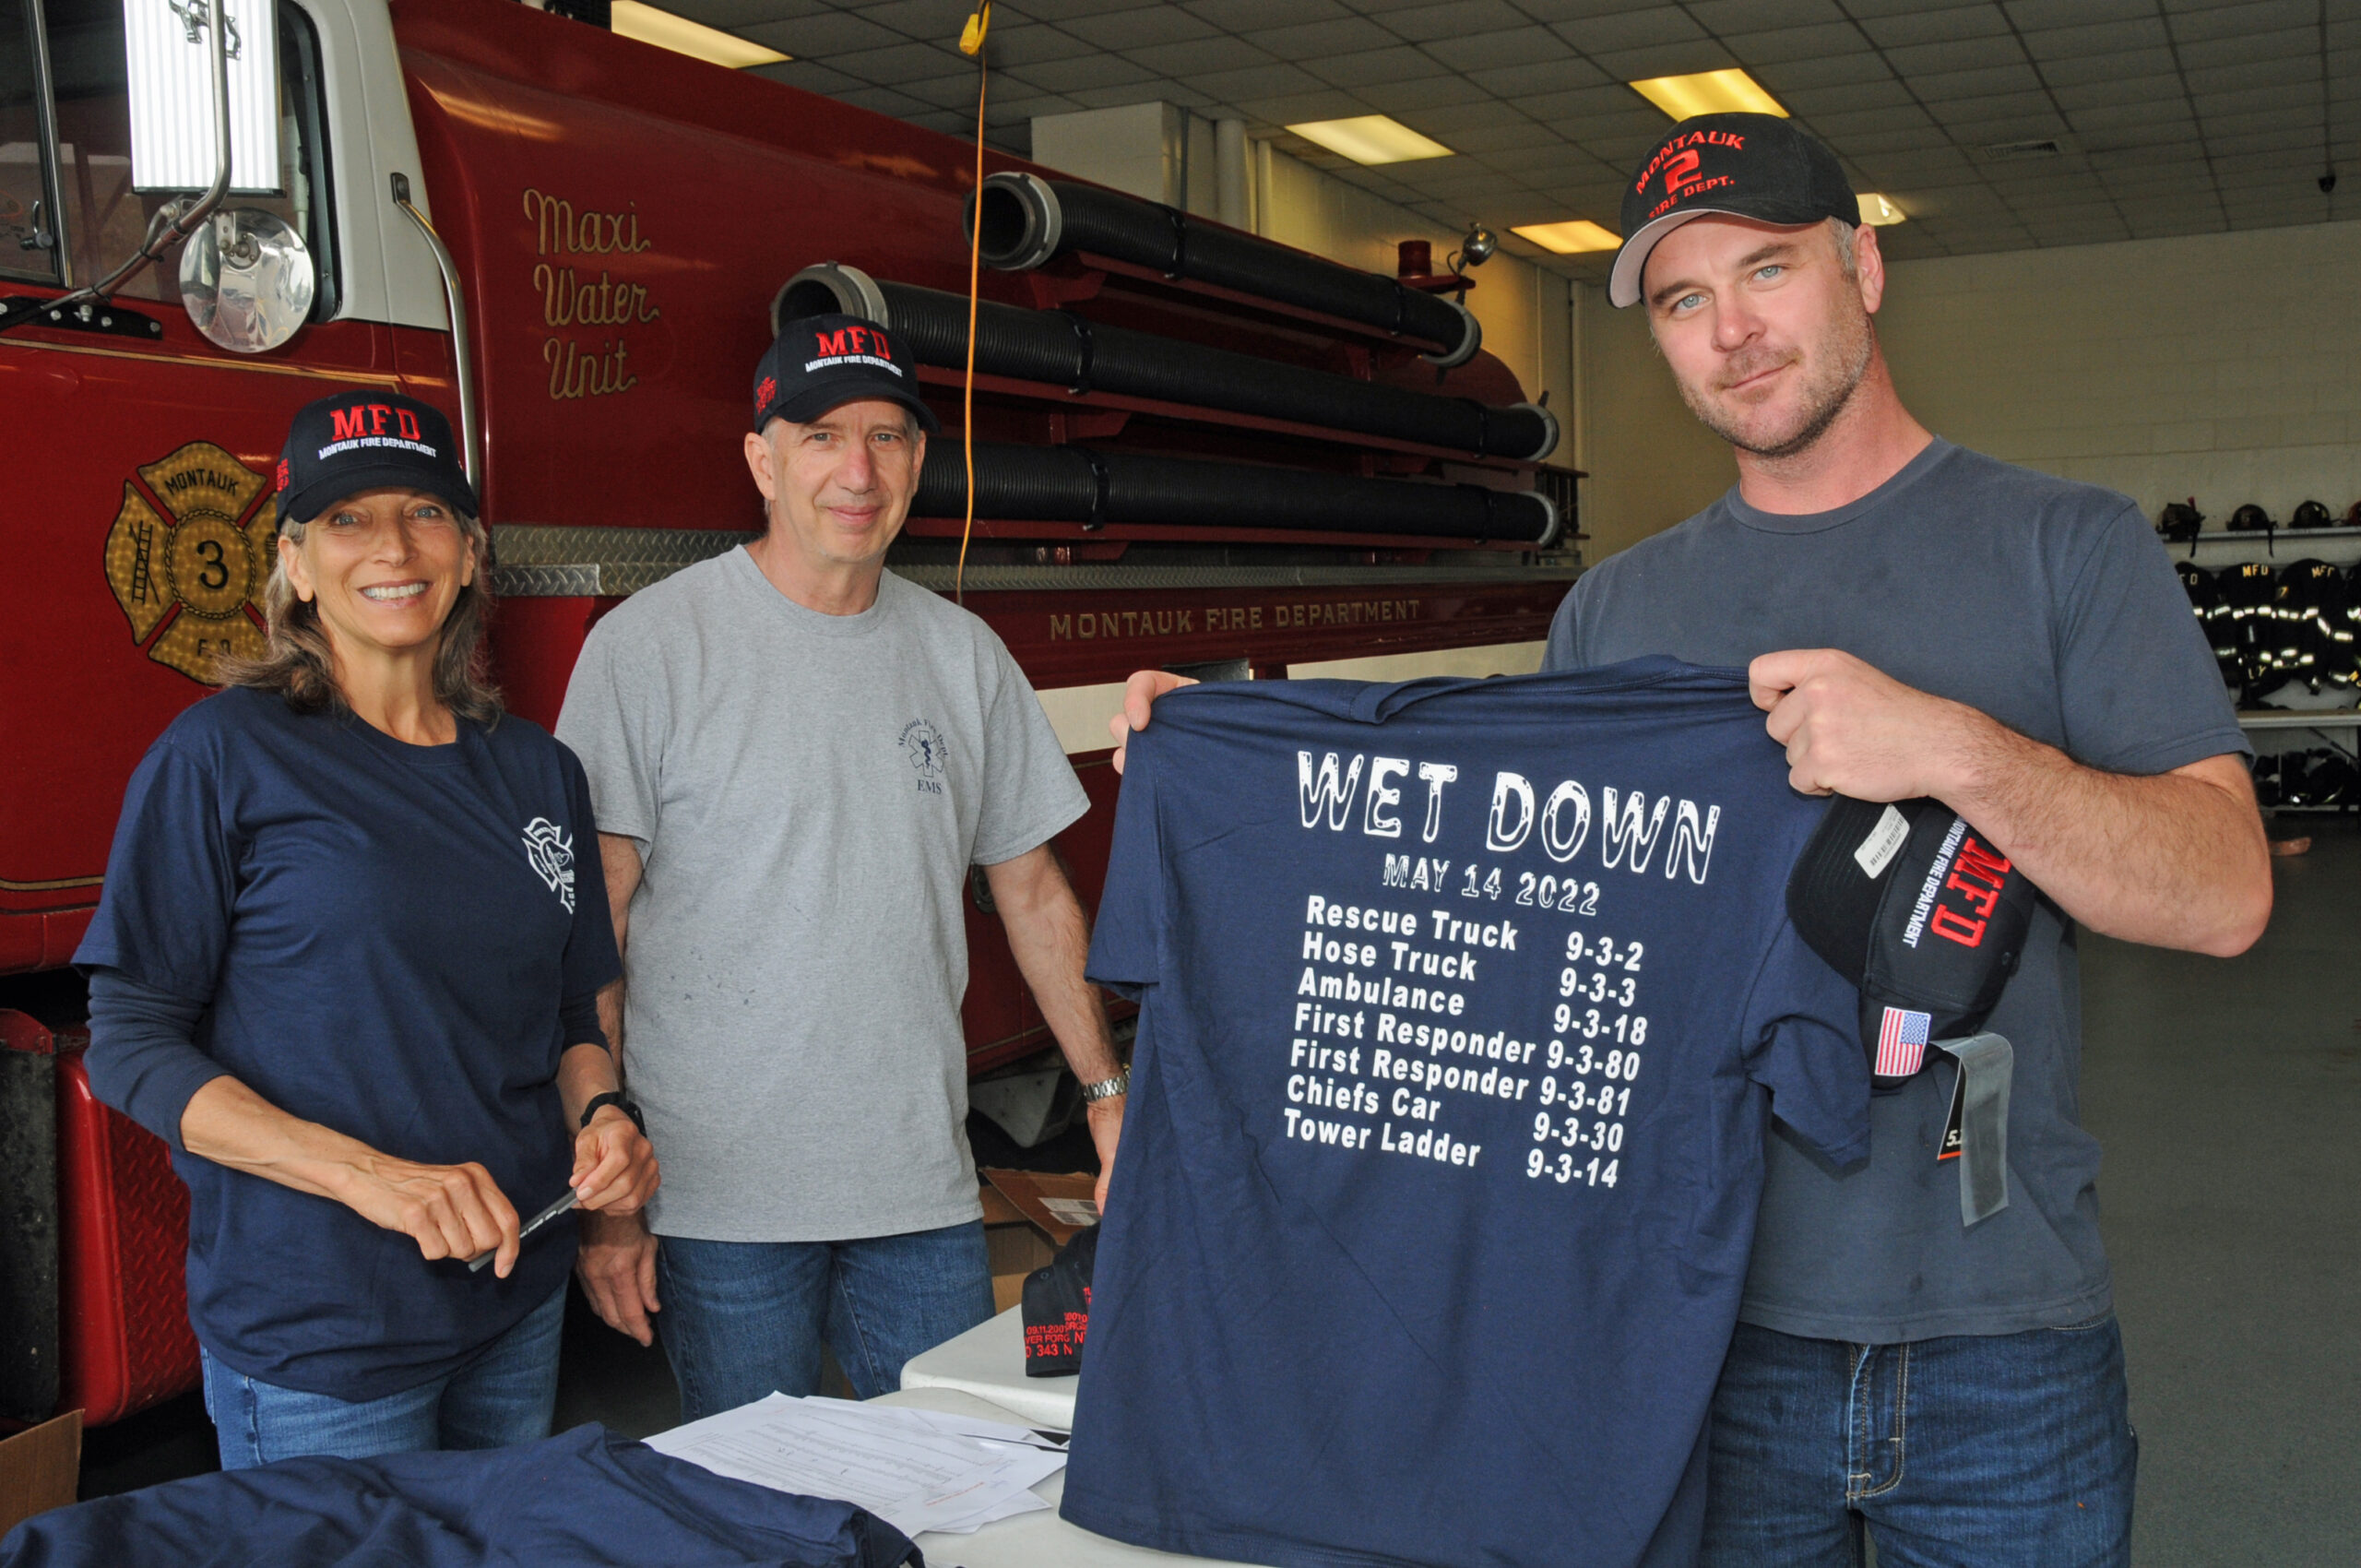 Joy Hear, Robert Freyberg and Kyle Fagerland at the  Montauk Fire Department, Wet-Down of seven trucks and emergency vehicles on Saturday.   RICHARD LEWIN